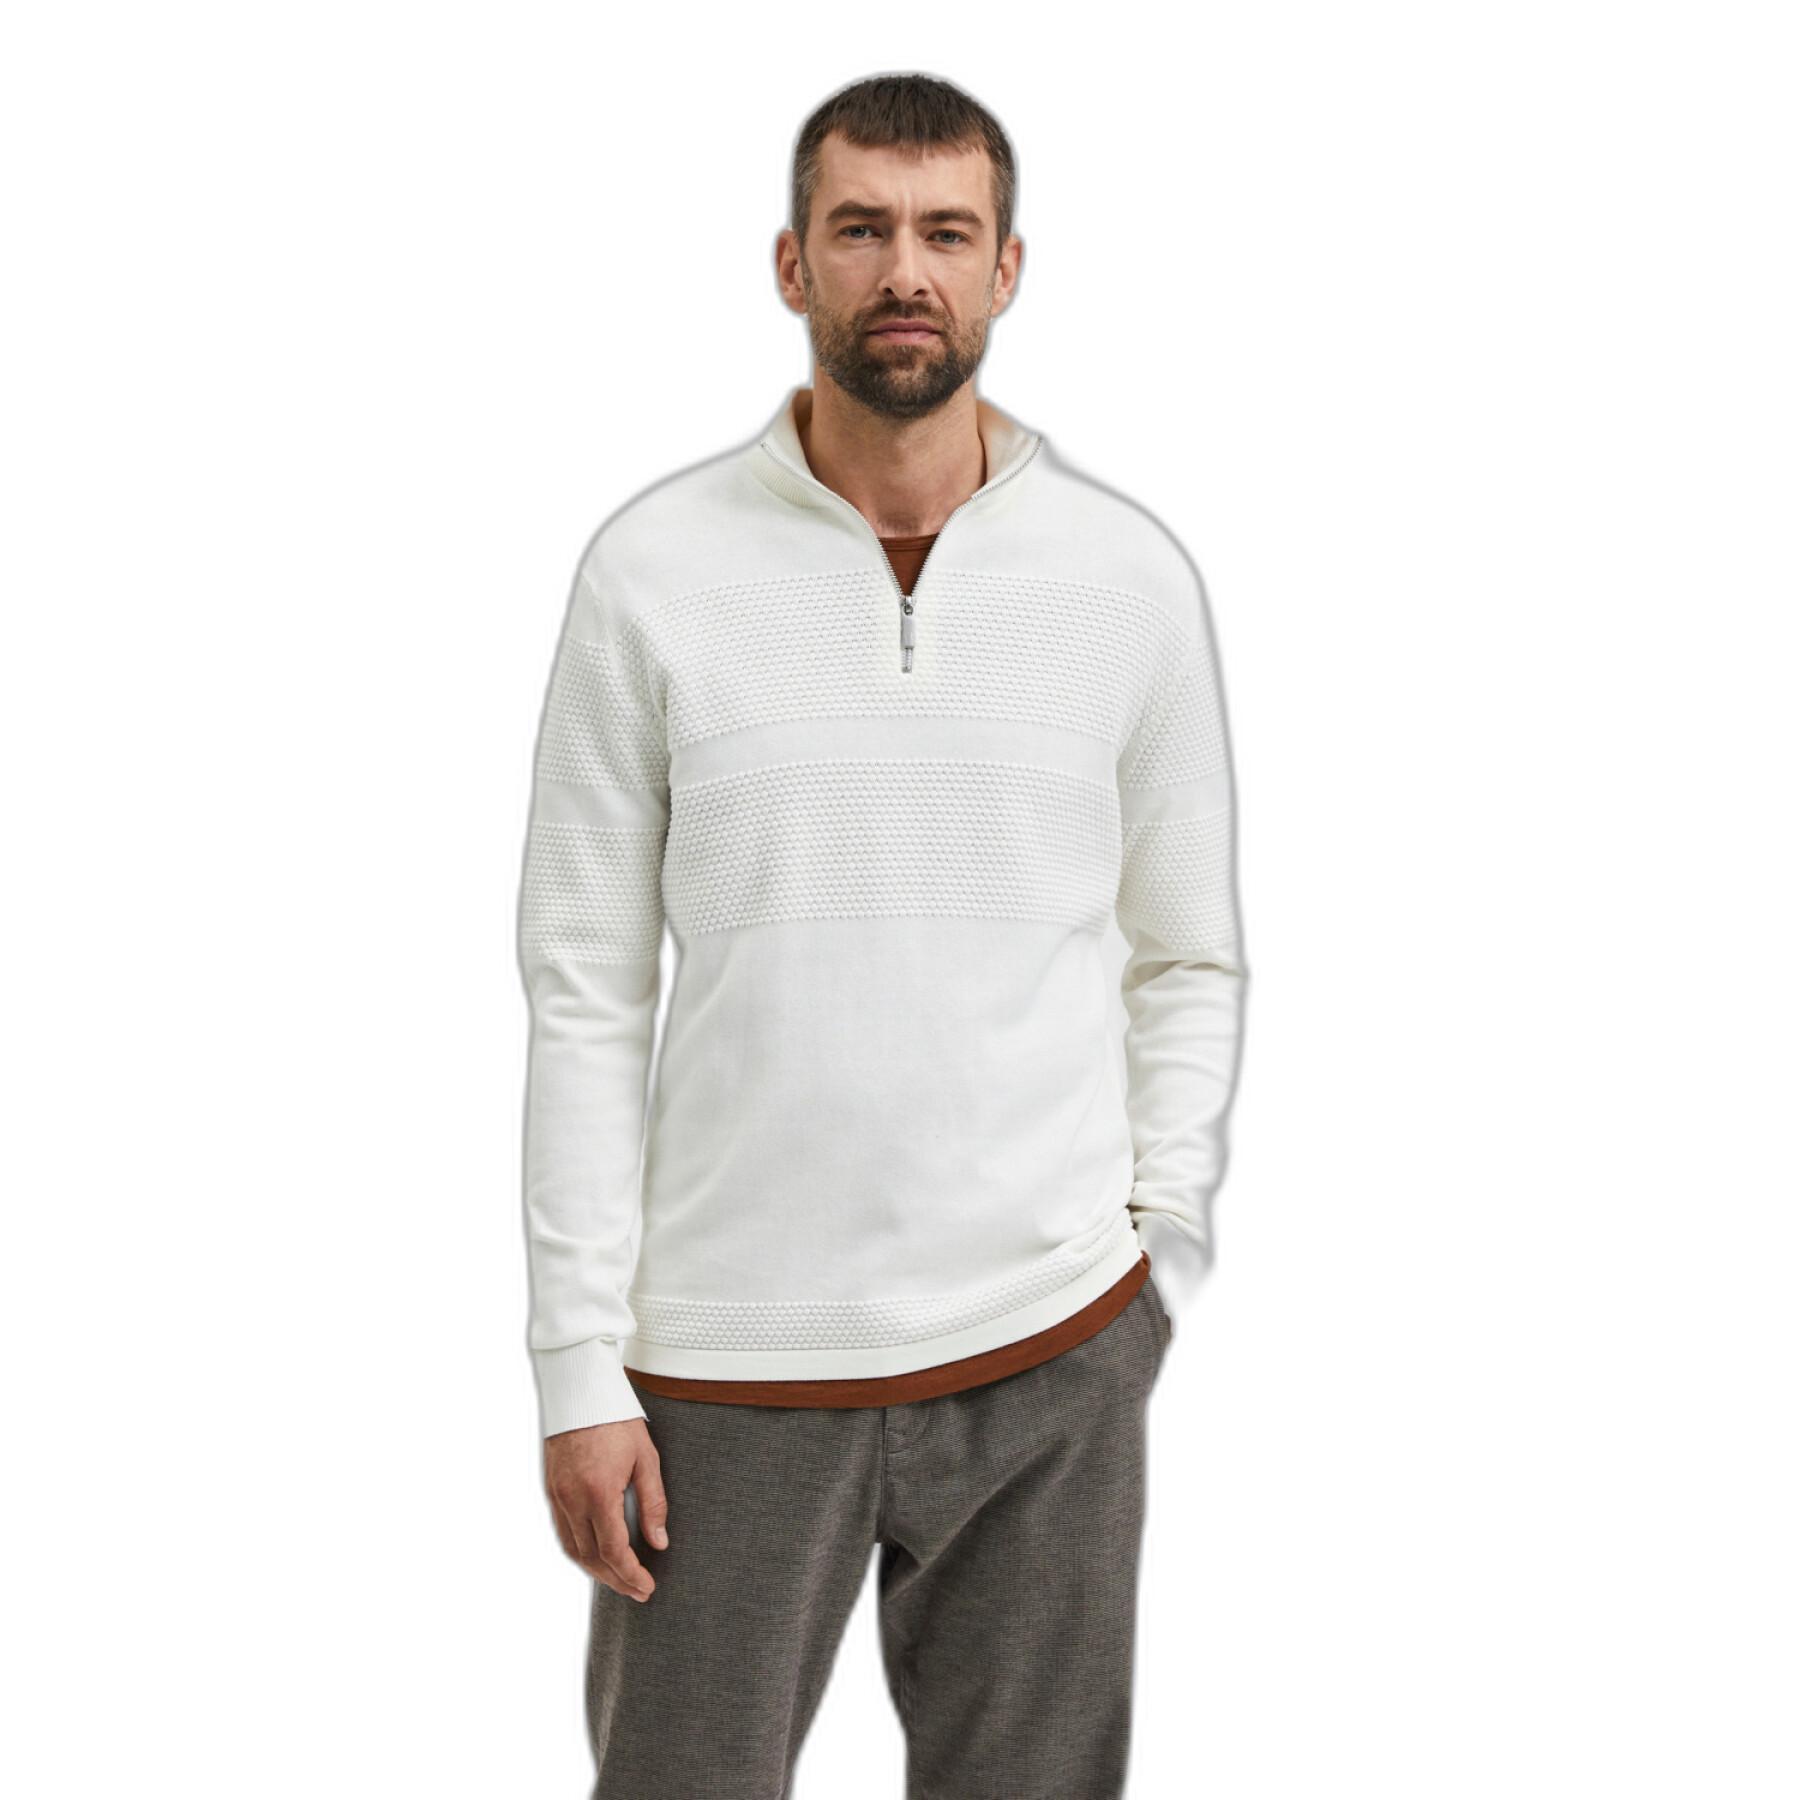 1/2 zip knit jumper Selected Maine